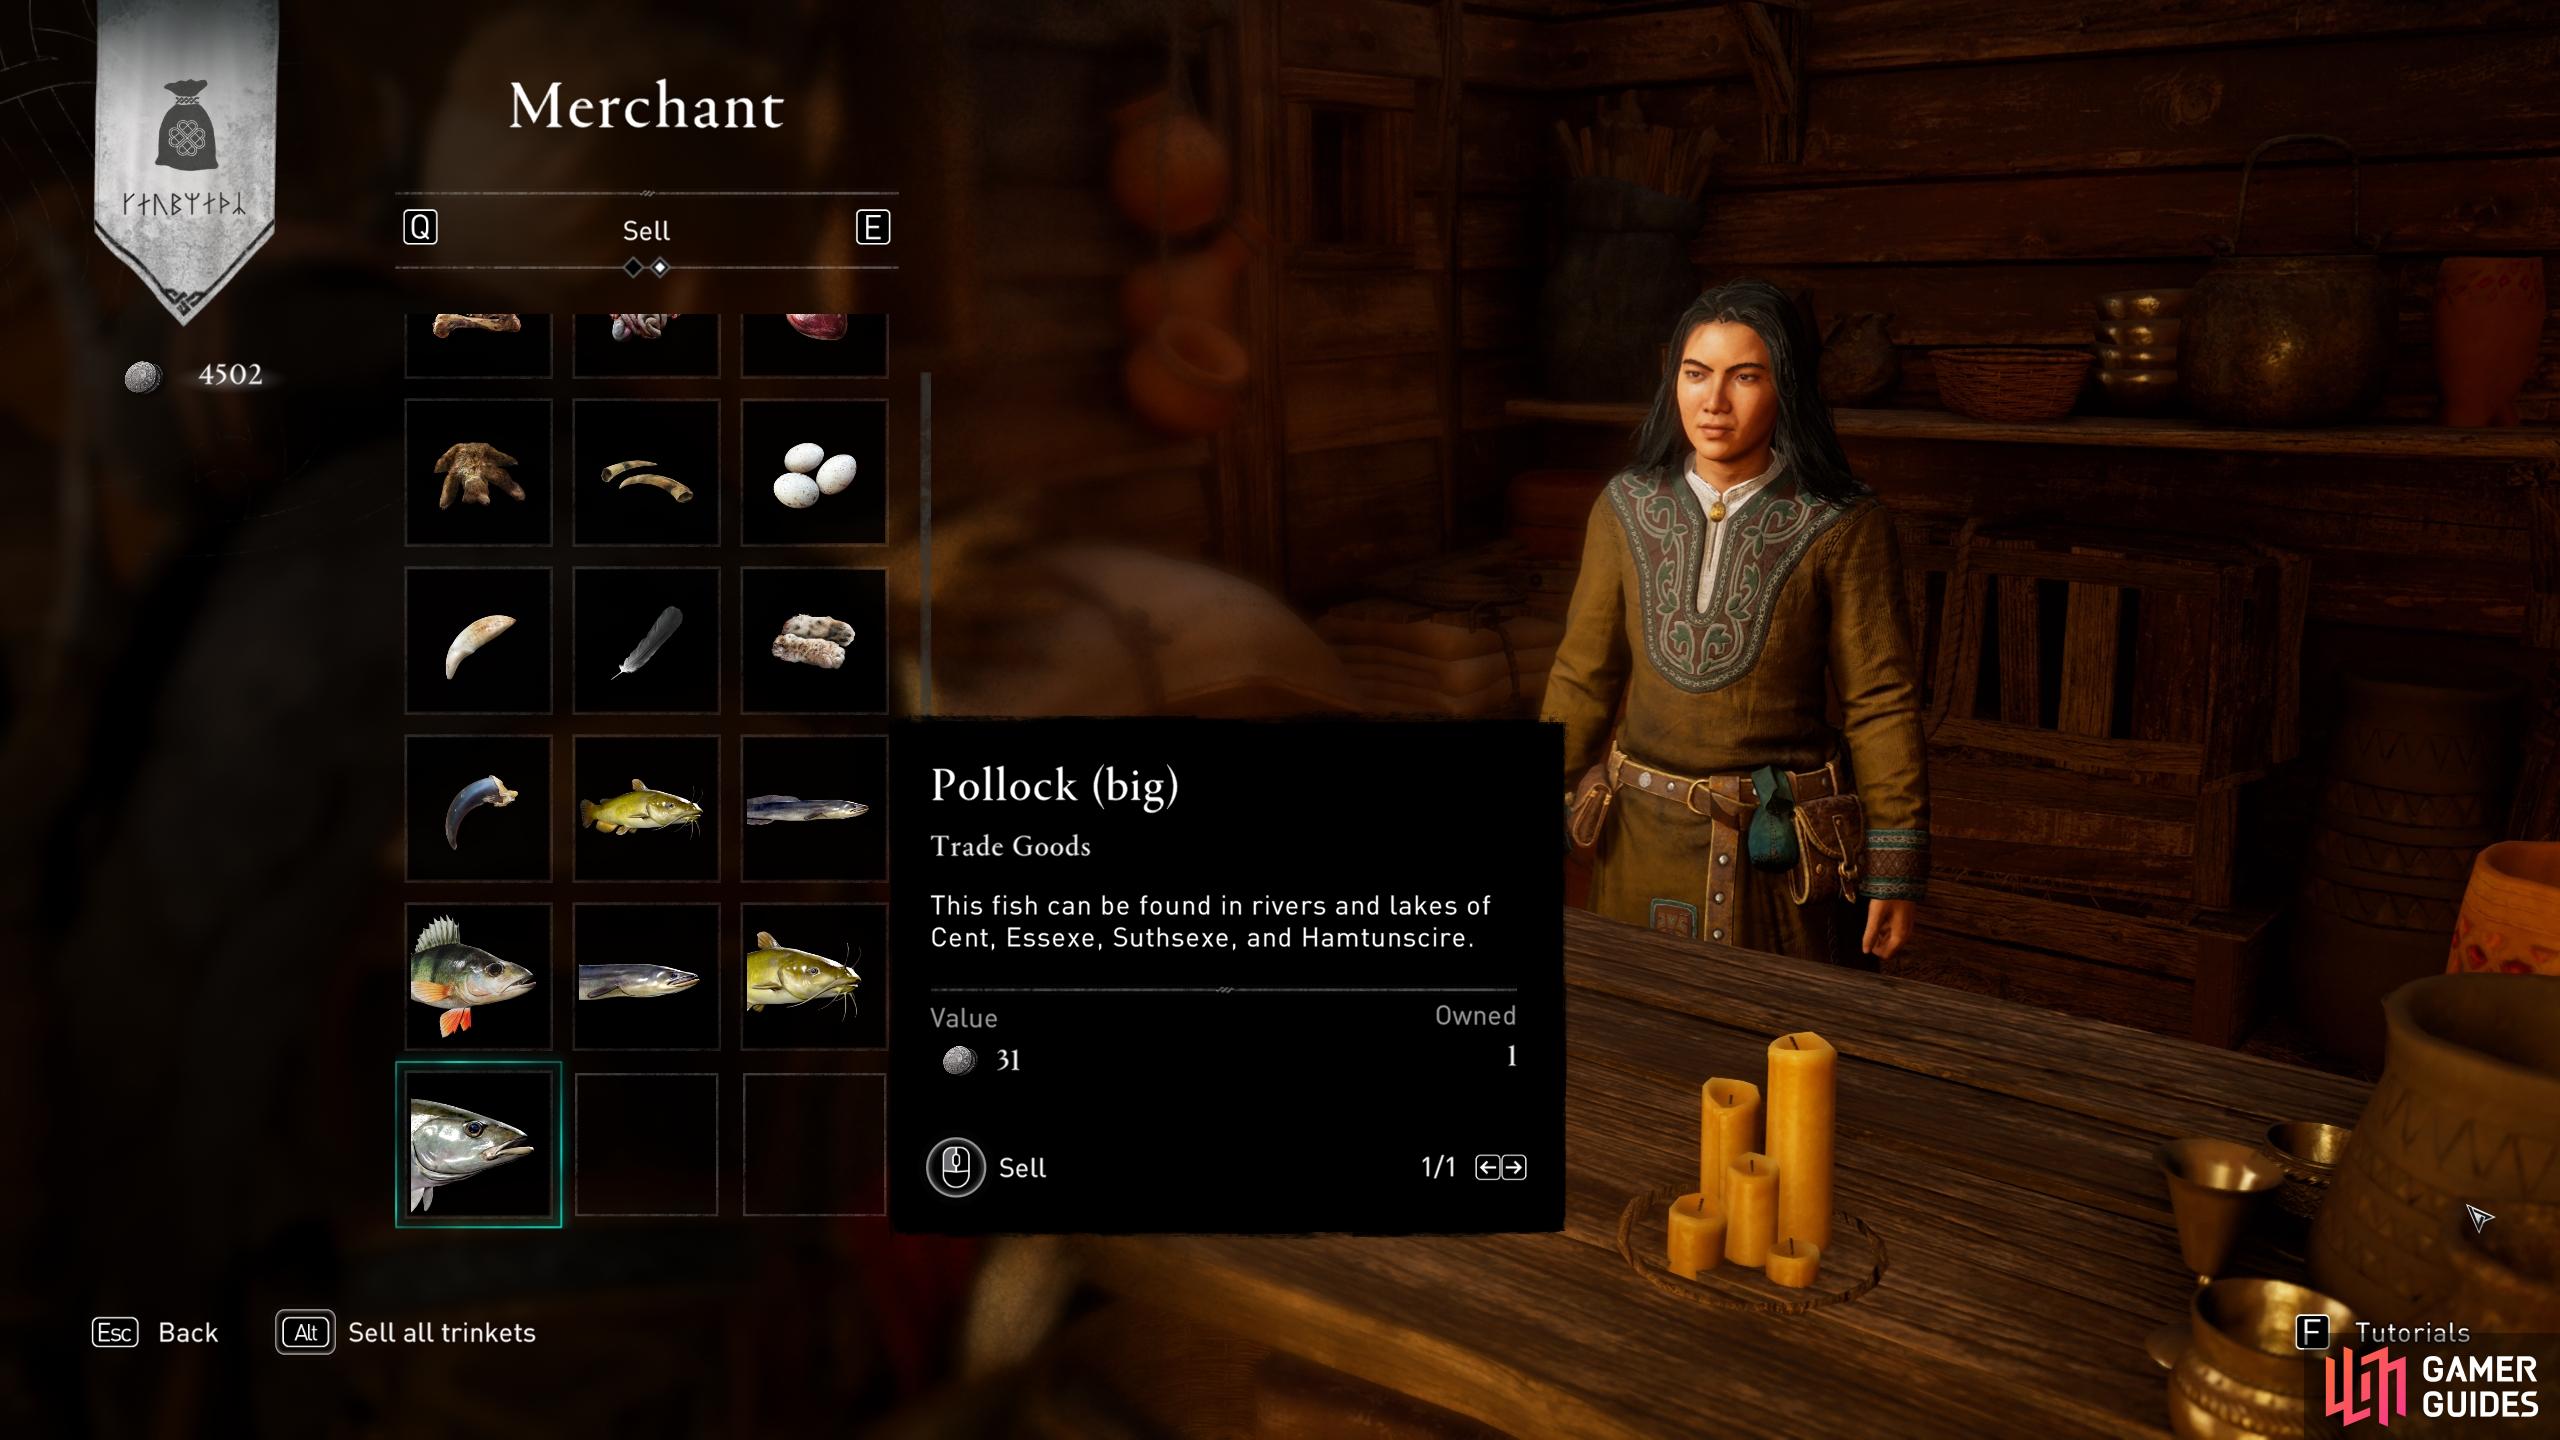 You can sell any fish at the trading post or other merchants for a decent price.